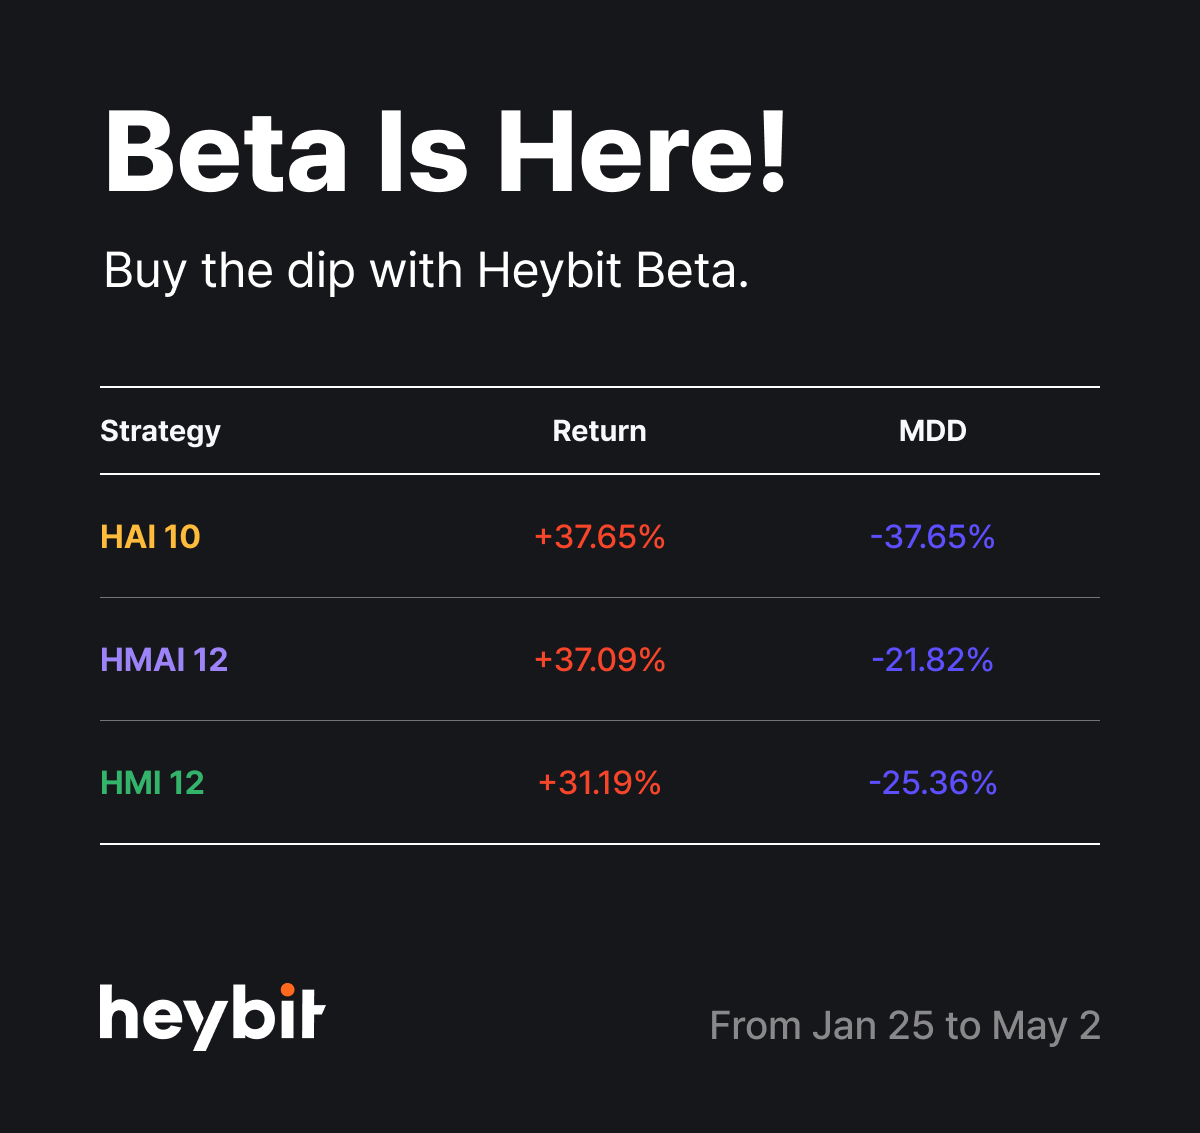 🎯Here is the key news of cryptos featured in HEYBIT Beta! 🔍Crypto News $BTC ☀️ Arthur Hayes: 'BTC has bottomed out... gradual recovery expected by August' ☀️ Analysis: 'Recent BTC weakness similar to post-U.S. spot ETF launch... rebound expected next week' ☀️ BlackRock: